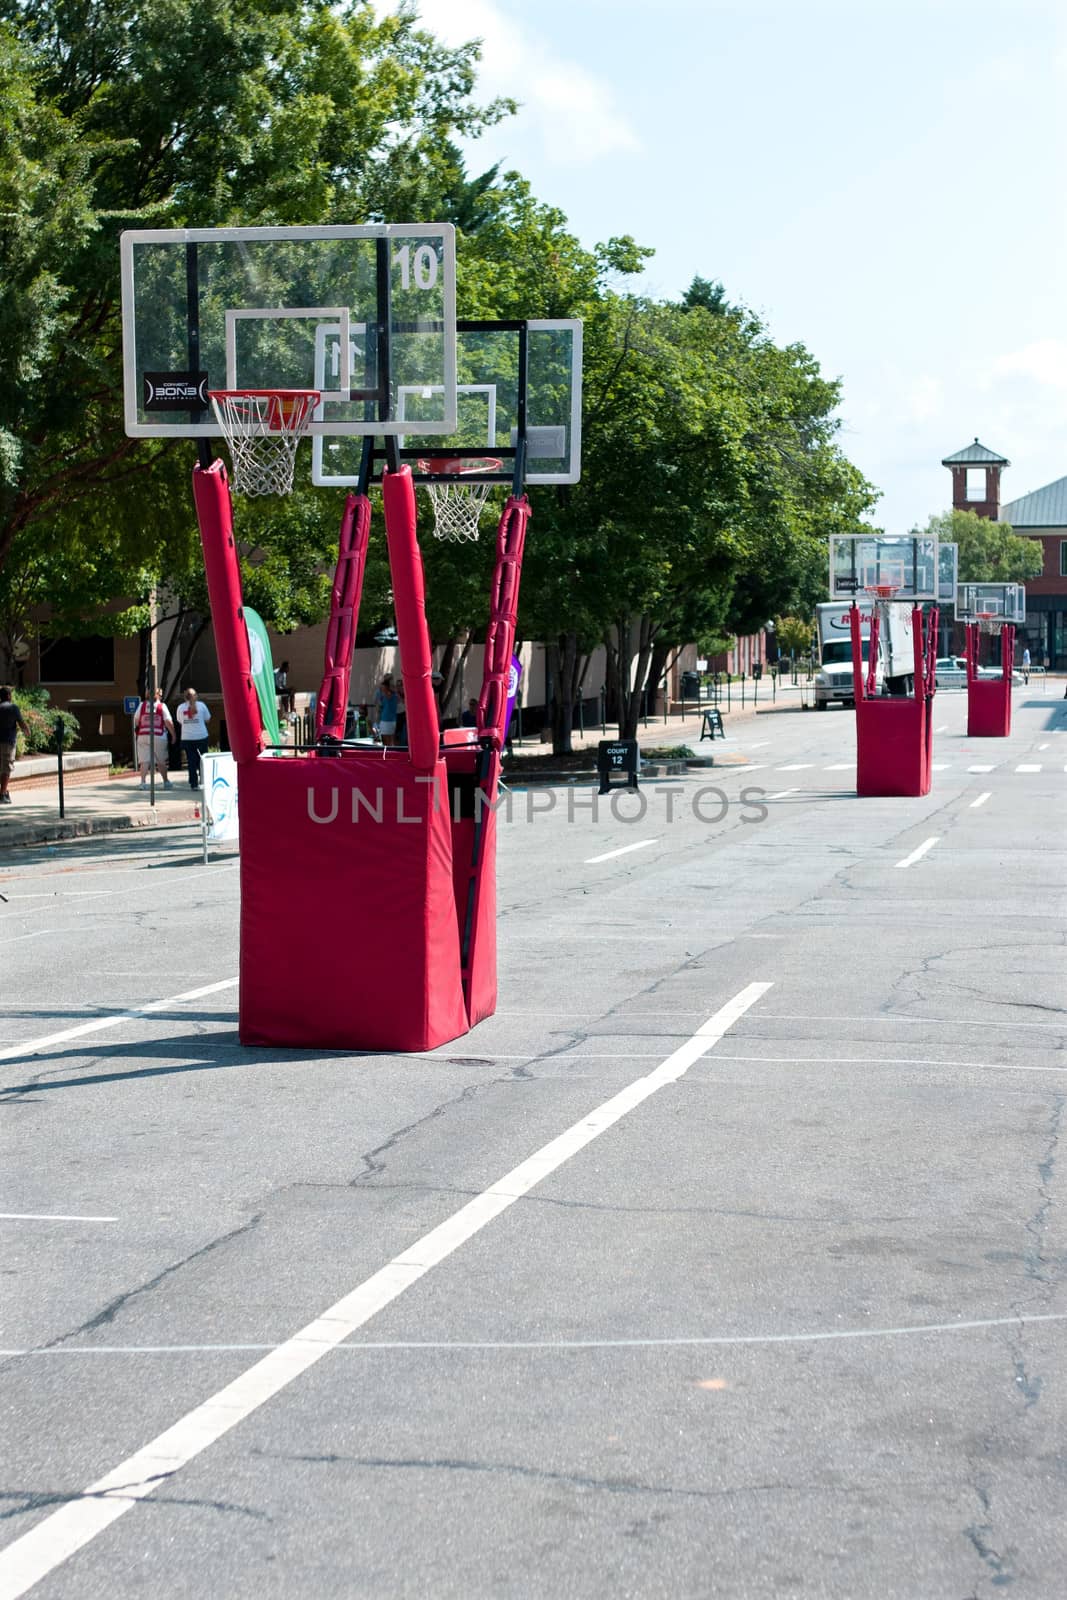 Athens, GA, USA - August 24, 2013:  Several basketball goals are set up for a 3-on-3 tournament being played on the streets of downtown Athens. 